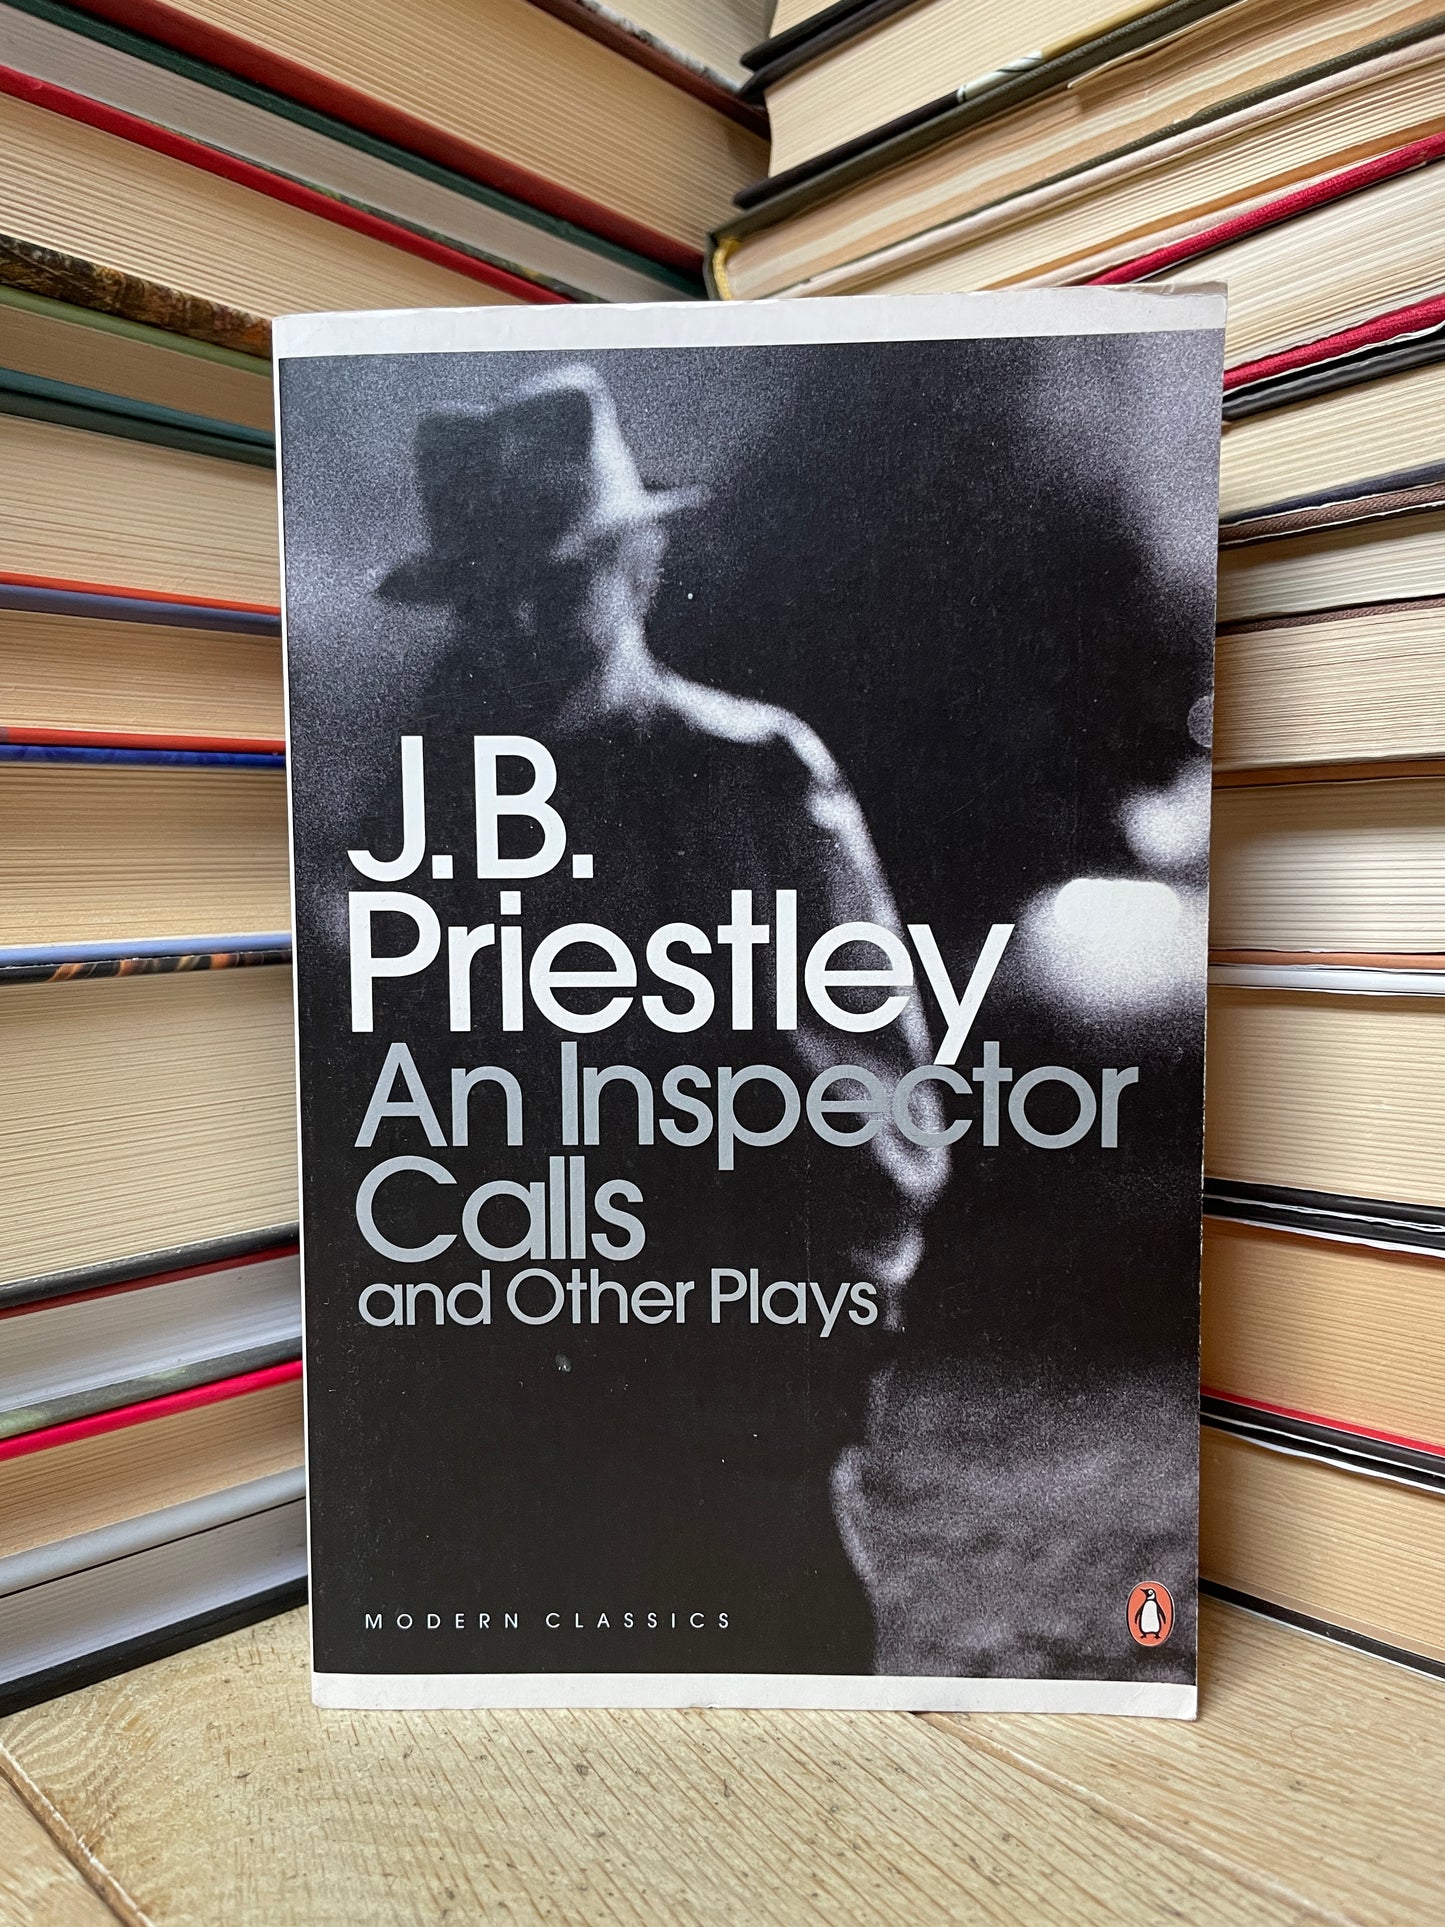 J. B. Priestley - An Inspector Calls and Other Plays